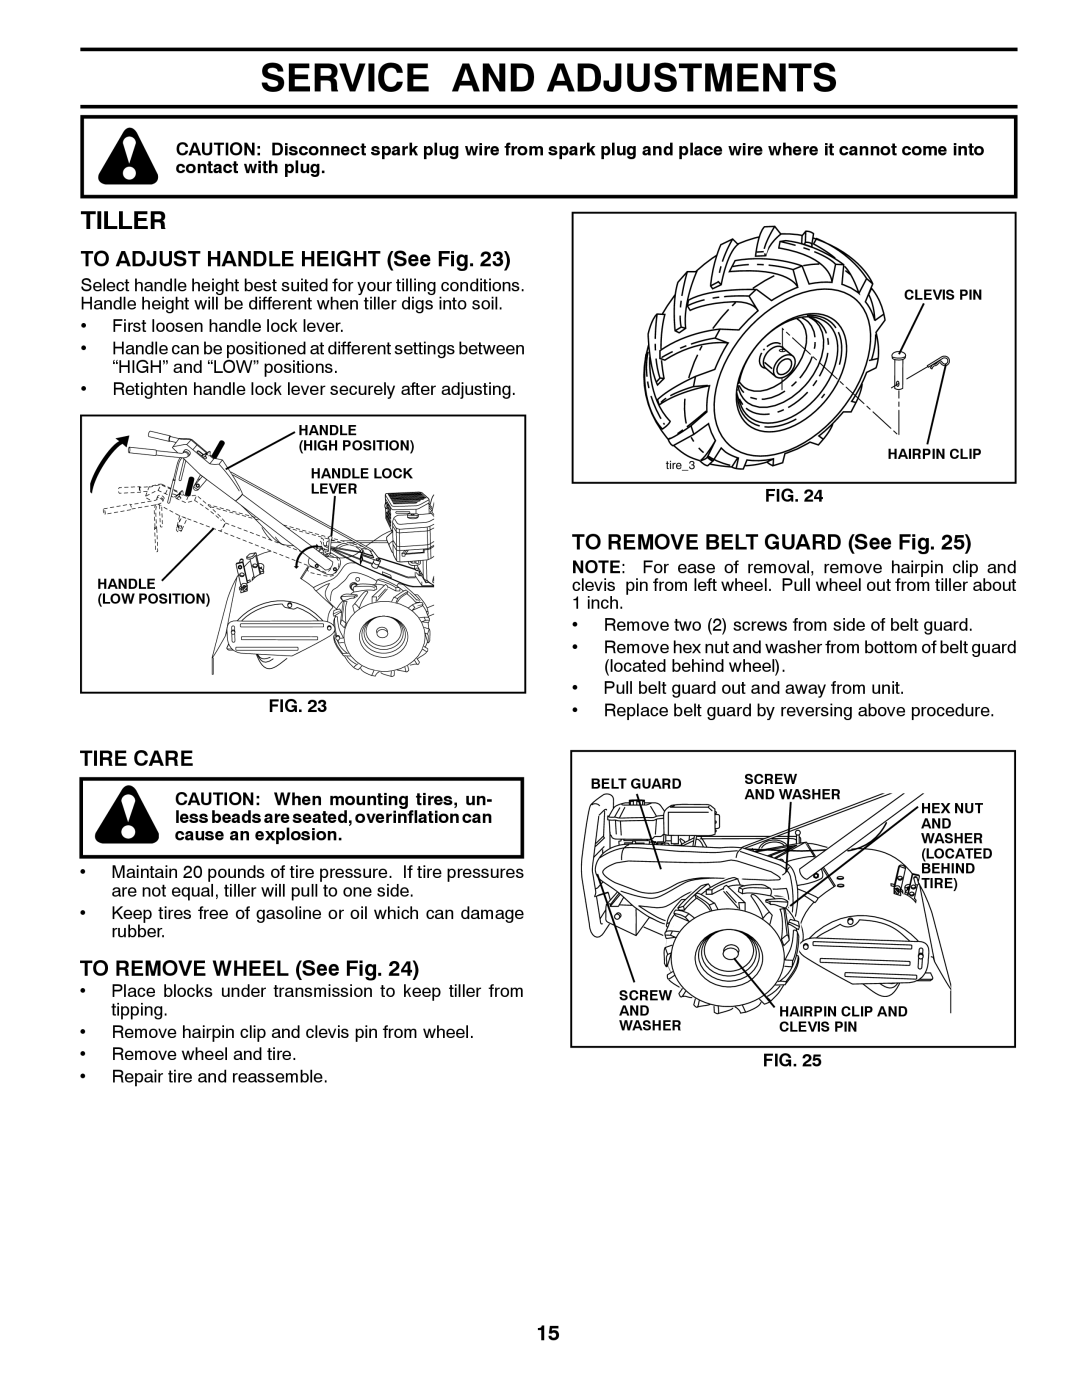 Poulan DRT875 Service And Adjustments, Tiller, TO ADJUST HANDLE HEIGHT See Fig, TO REMOVE BELT GUARD See Fig, Tire Care 